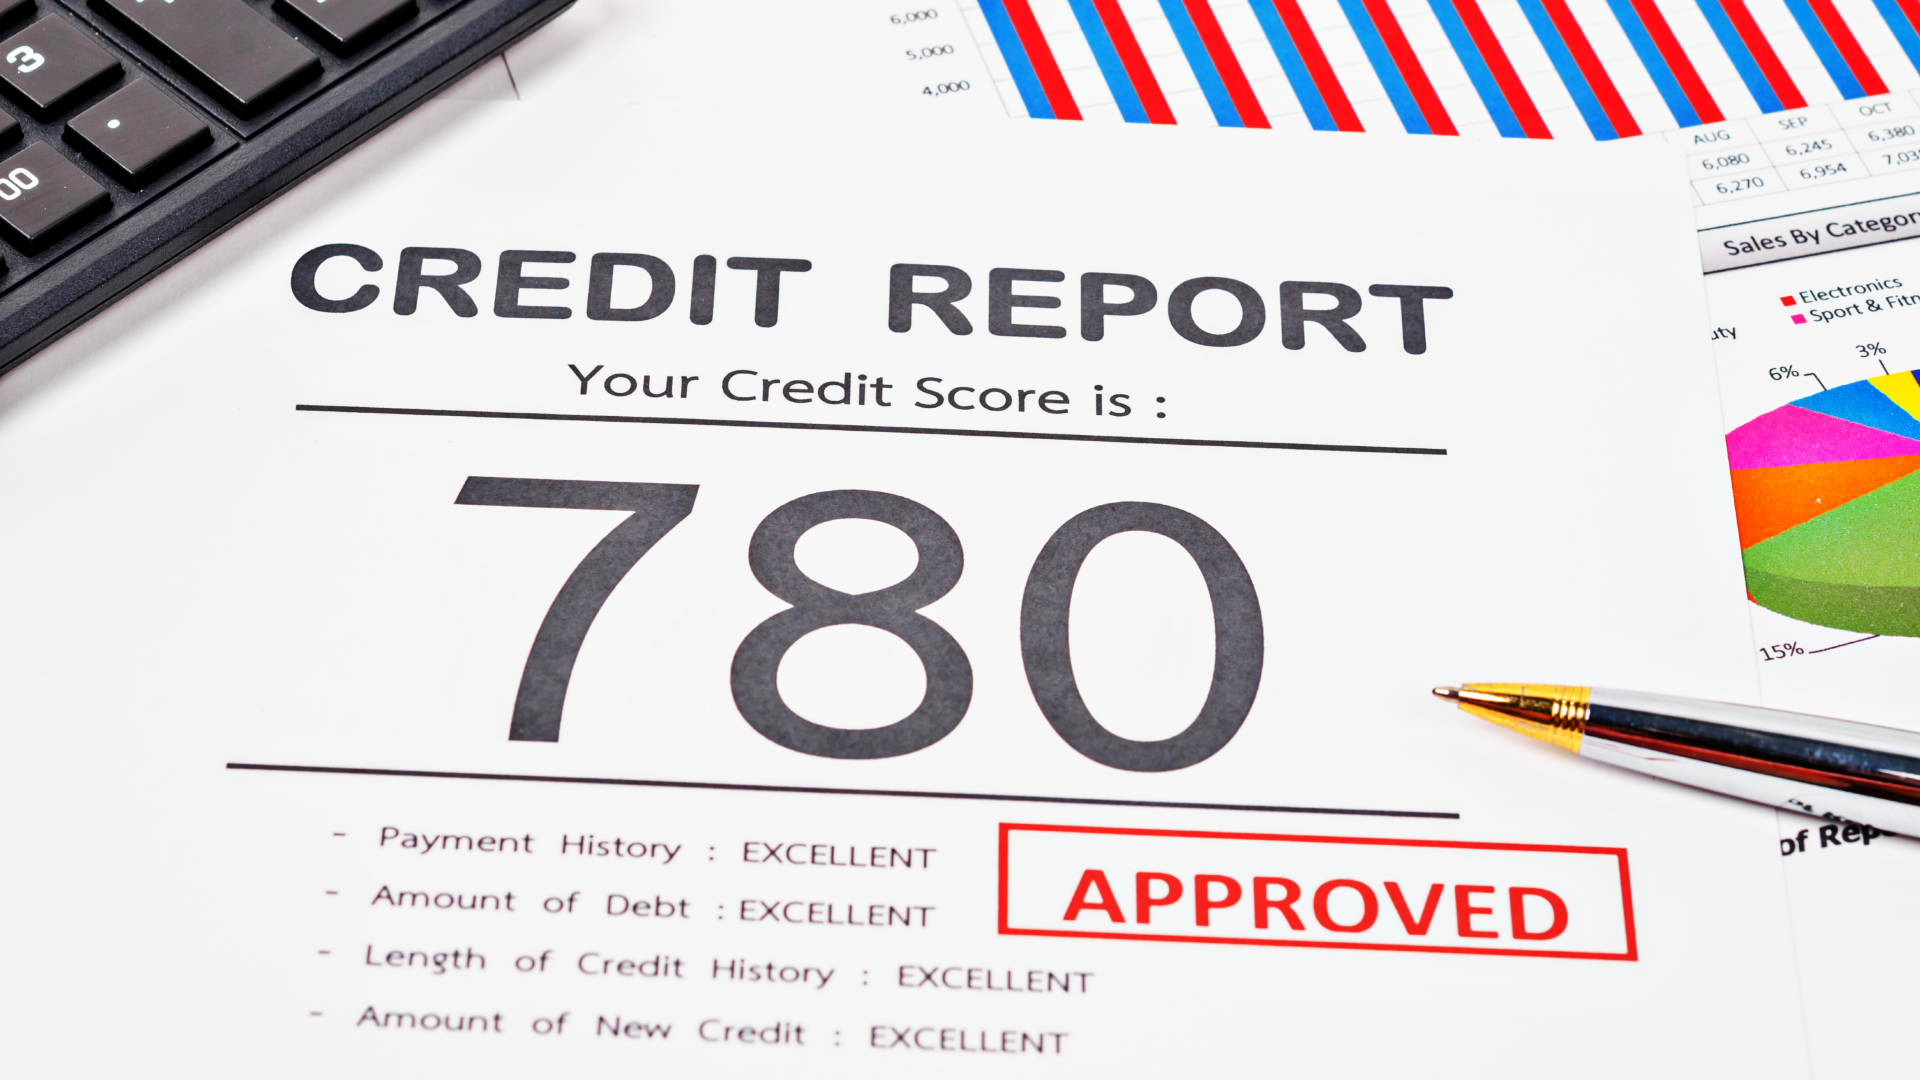 a credit report showing a score of 780 and marked as approved